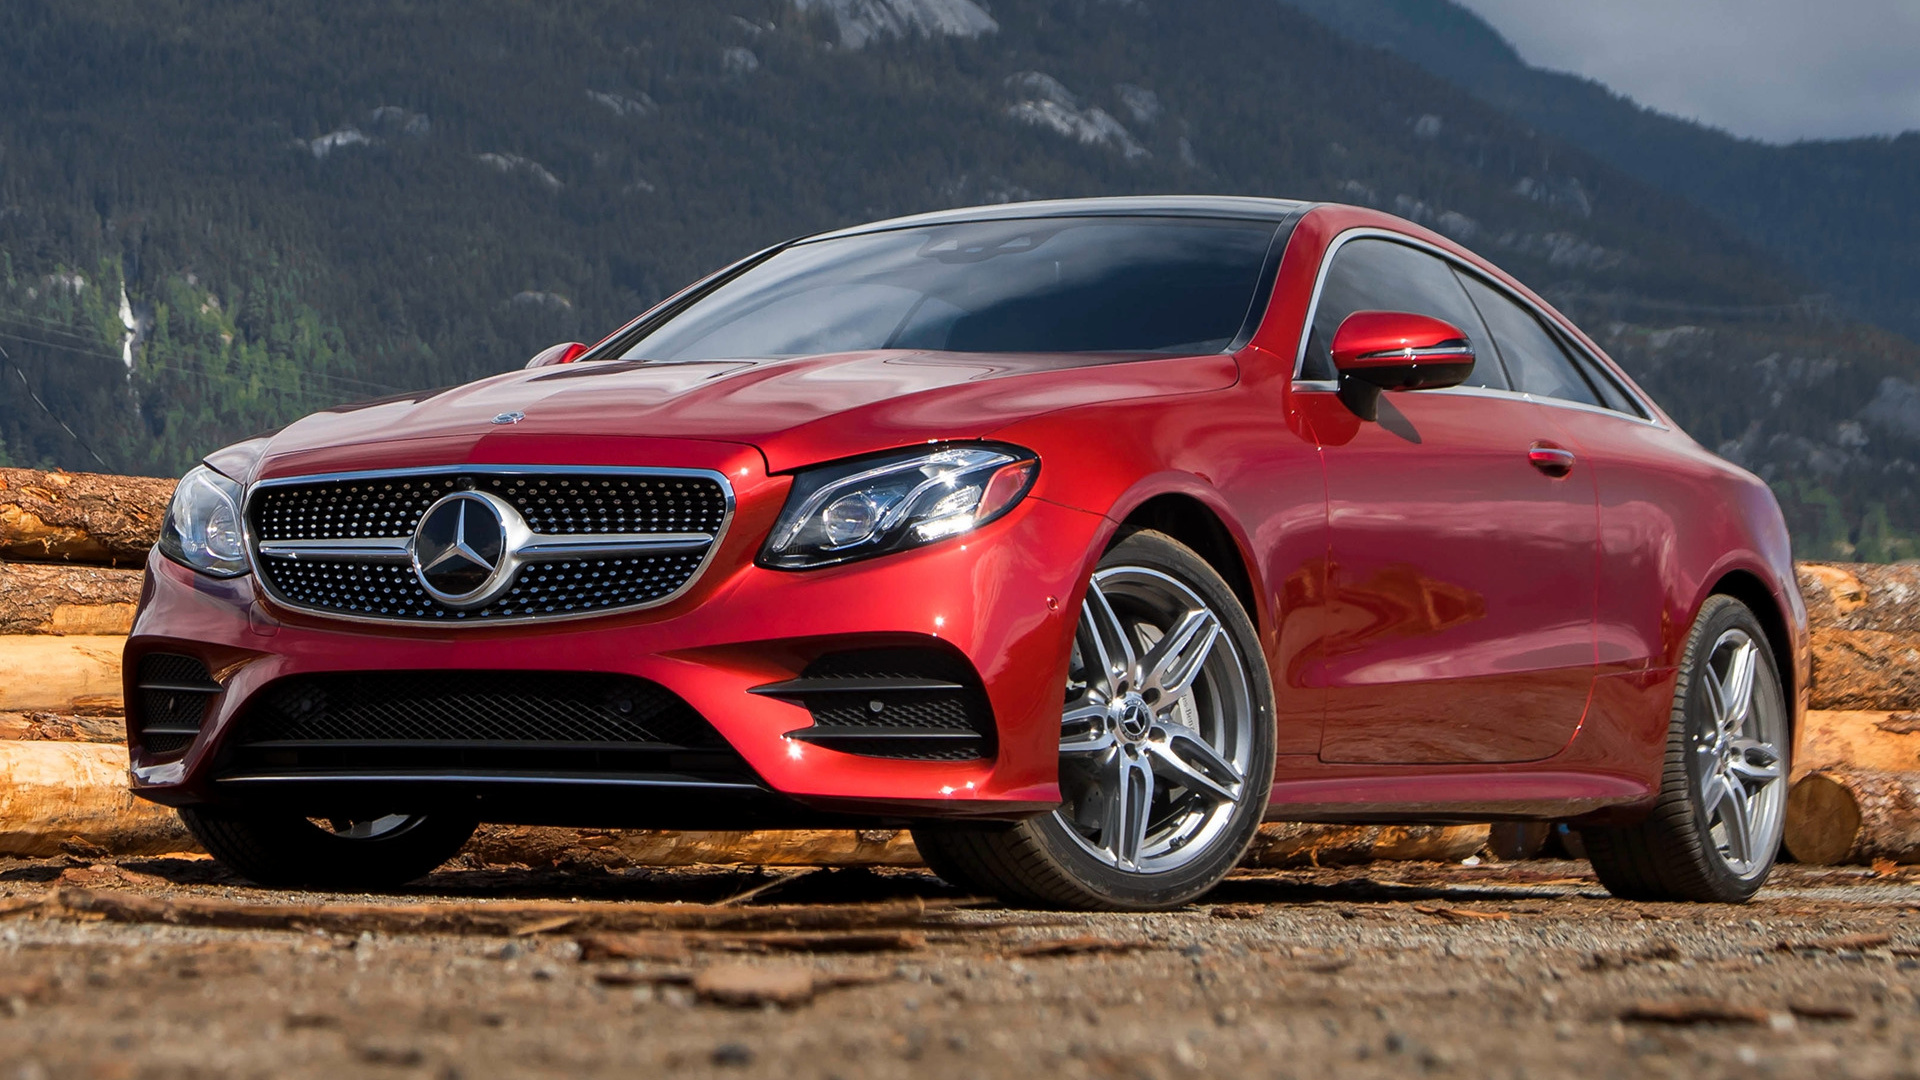 Car Coupe Luxury Car Mercedes Benz E 400 4matic Coupe Amg Styling Red Car 1920x1080